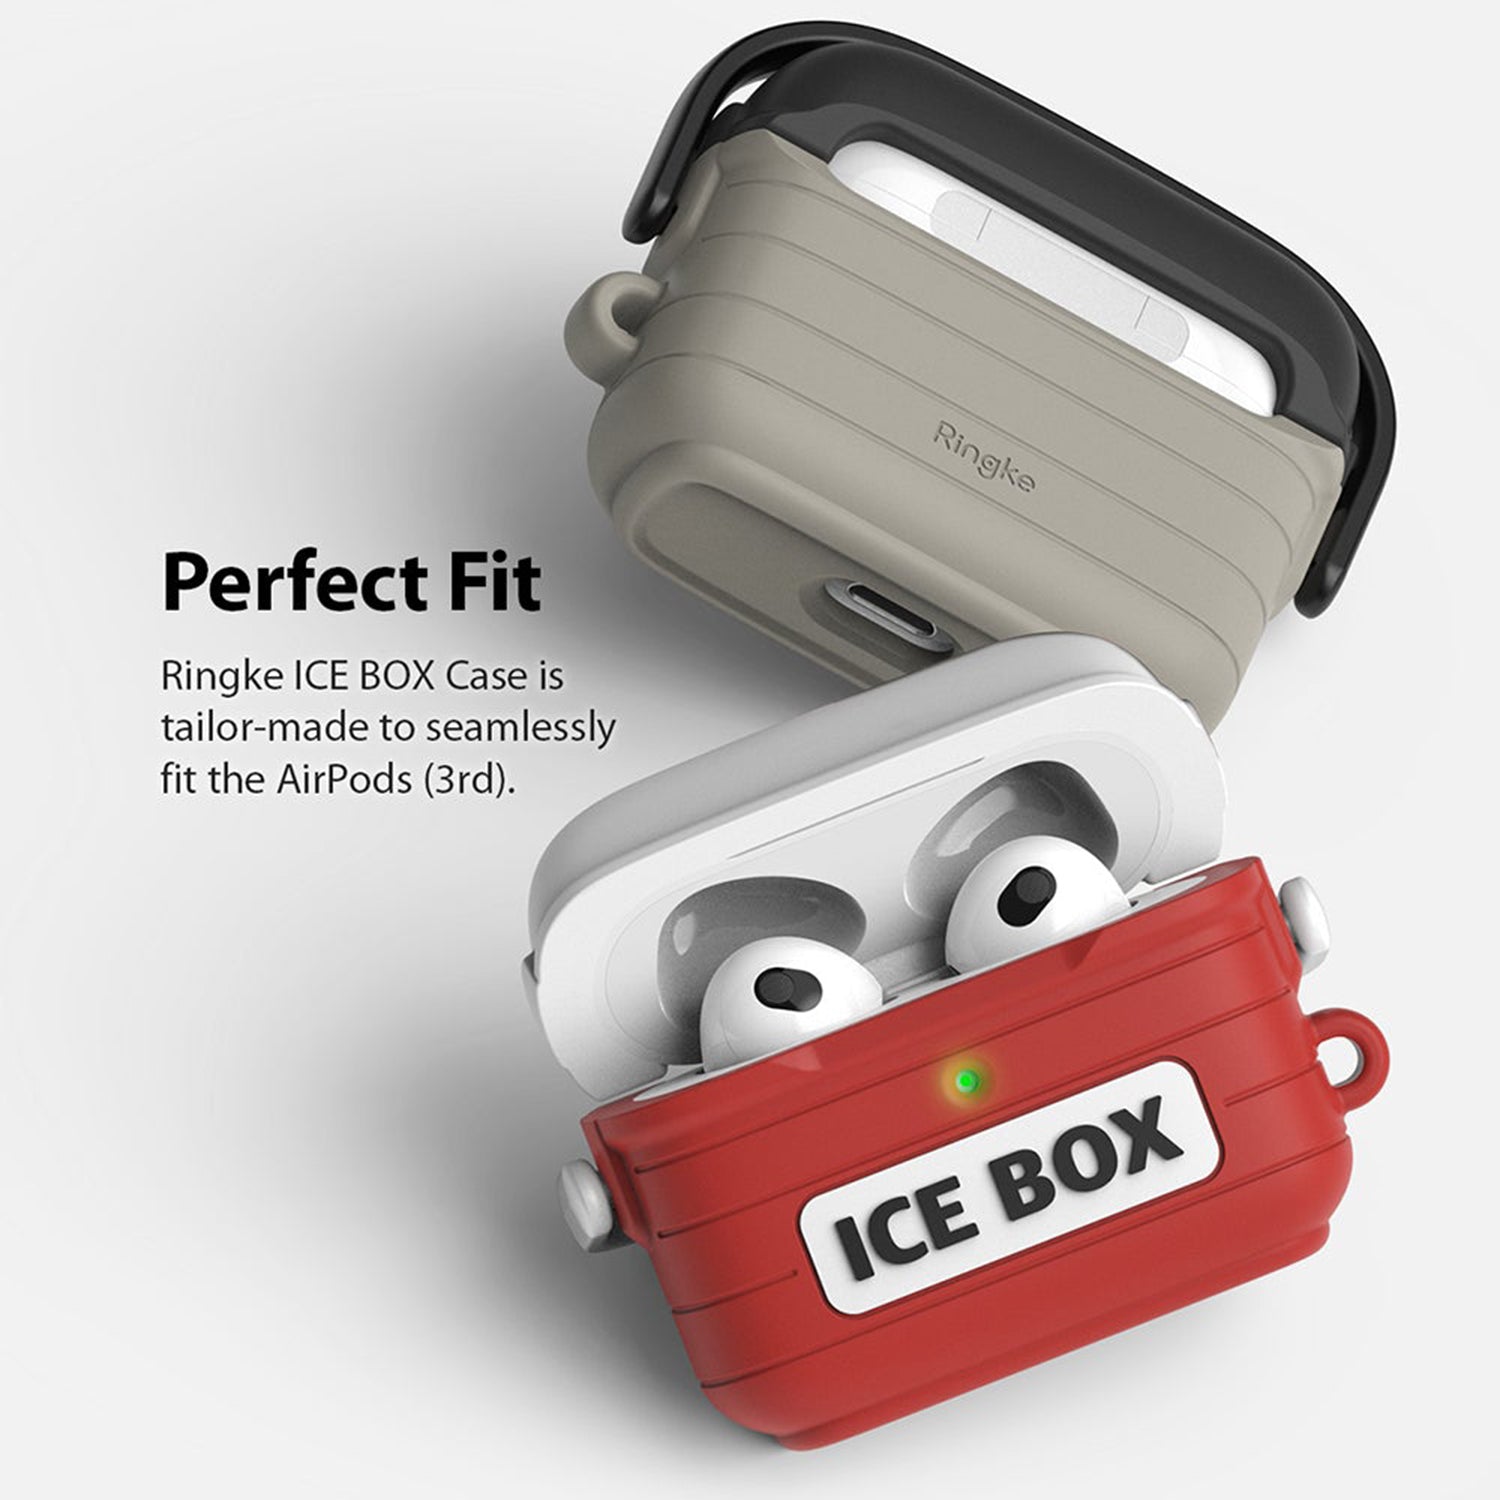 Ringke Ice Box Silicon Case for AirPods (3rd Gen) Default Ringke 